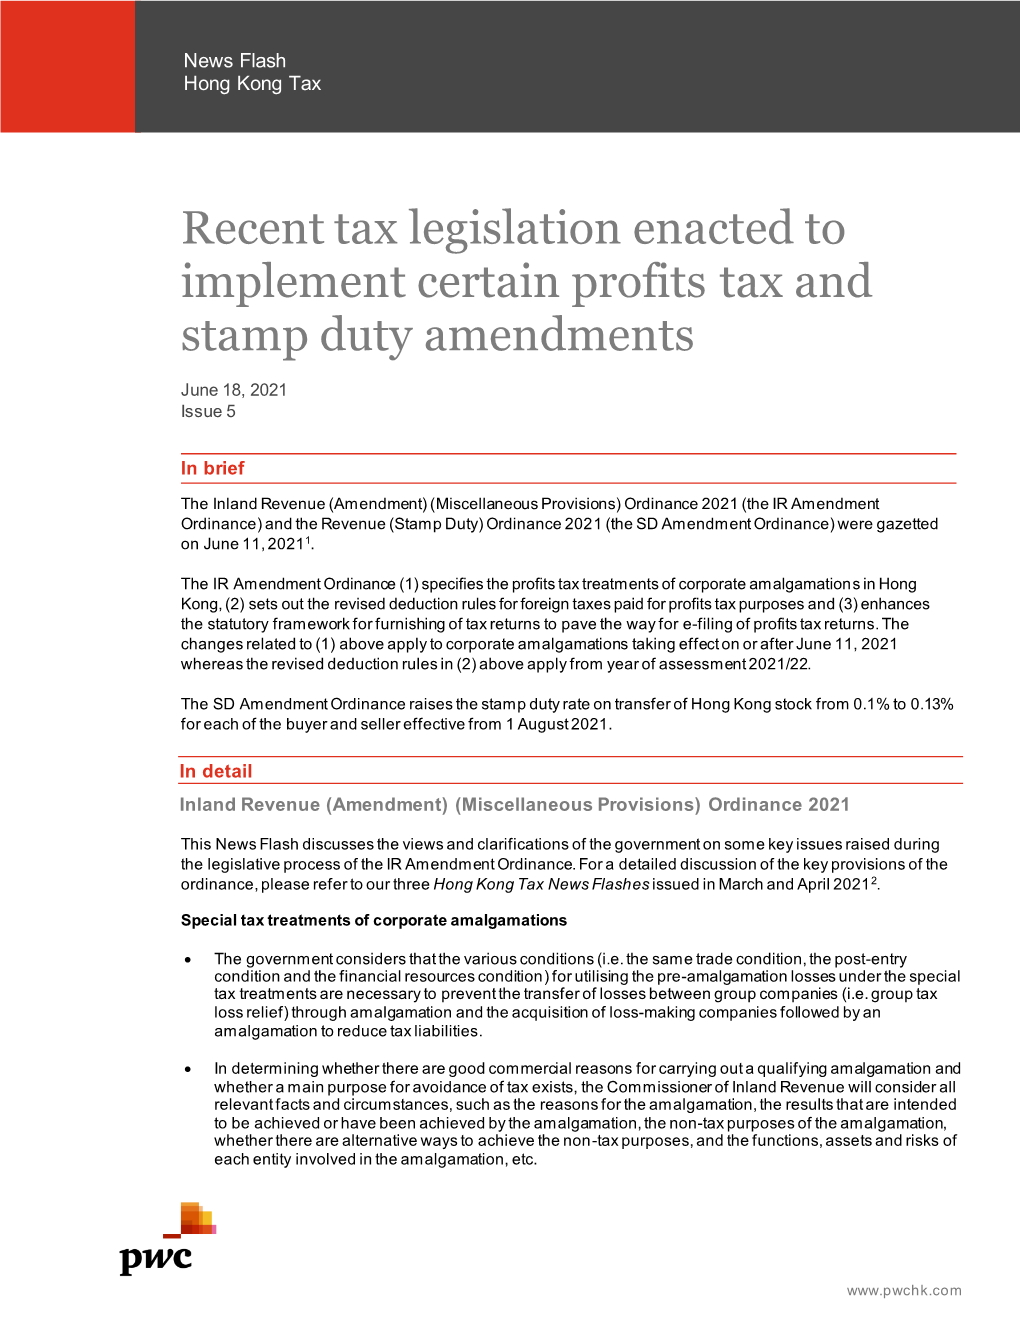 Recent Tax Legislation Enacted to Implement Certain Profits Tax and Stamp Duty Amendments